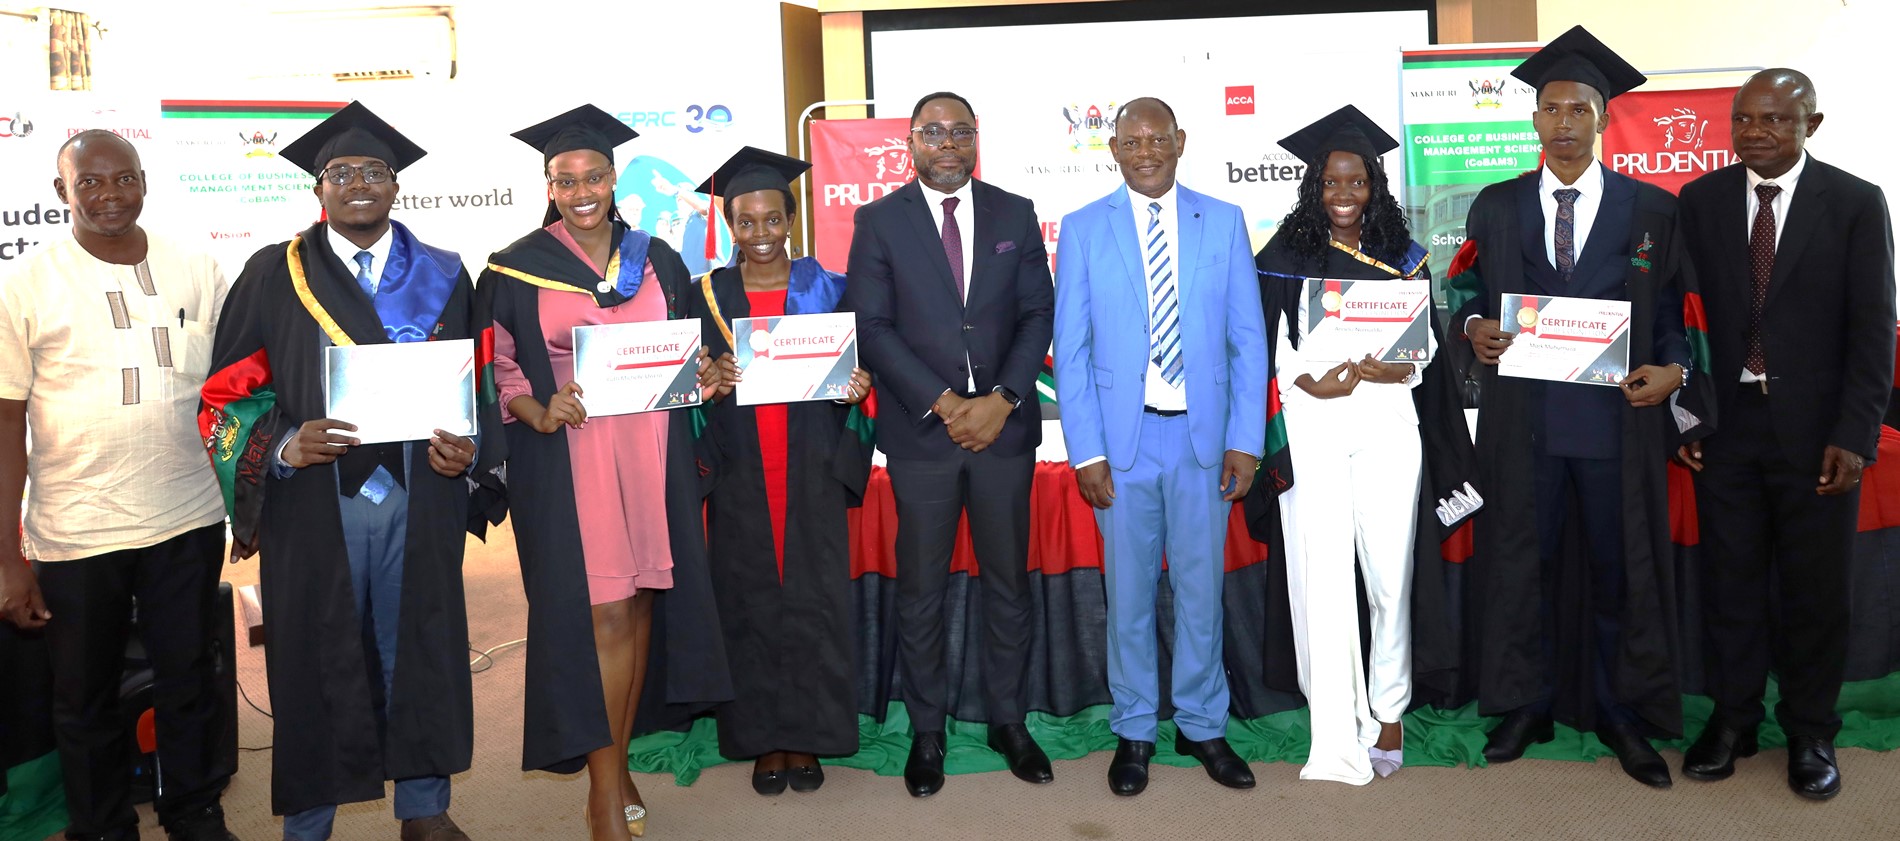 The Vice Chancellor-Prof. Barnabas Nawangwe, Principal CoBAMS-Prof. Eria Hisali, Dr. Felix Wamono and CEO of Prudential Assurance-Mr Tetteh Ayitevie with the top five Actuarial Science students of the 74th Graduation Ceremony. Prudential Assurance, ACCA Uganda and EPRC award ceremony for best performing business graduates, 12th March 2024, Conference Room, Room 2.2B, Level 2, School of Business, College of Business and Management Sciences (CoBAMS), Makerere University, Kampala Uganda, East Africa.